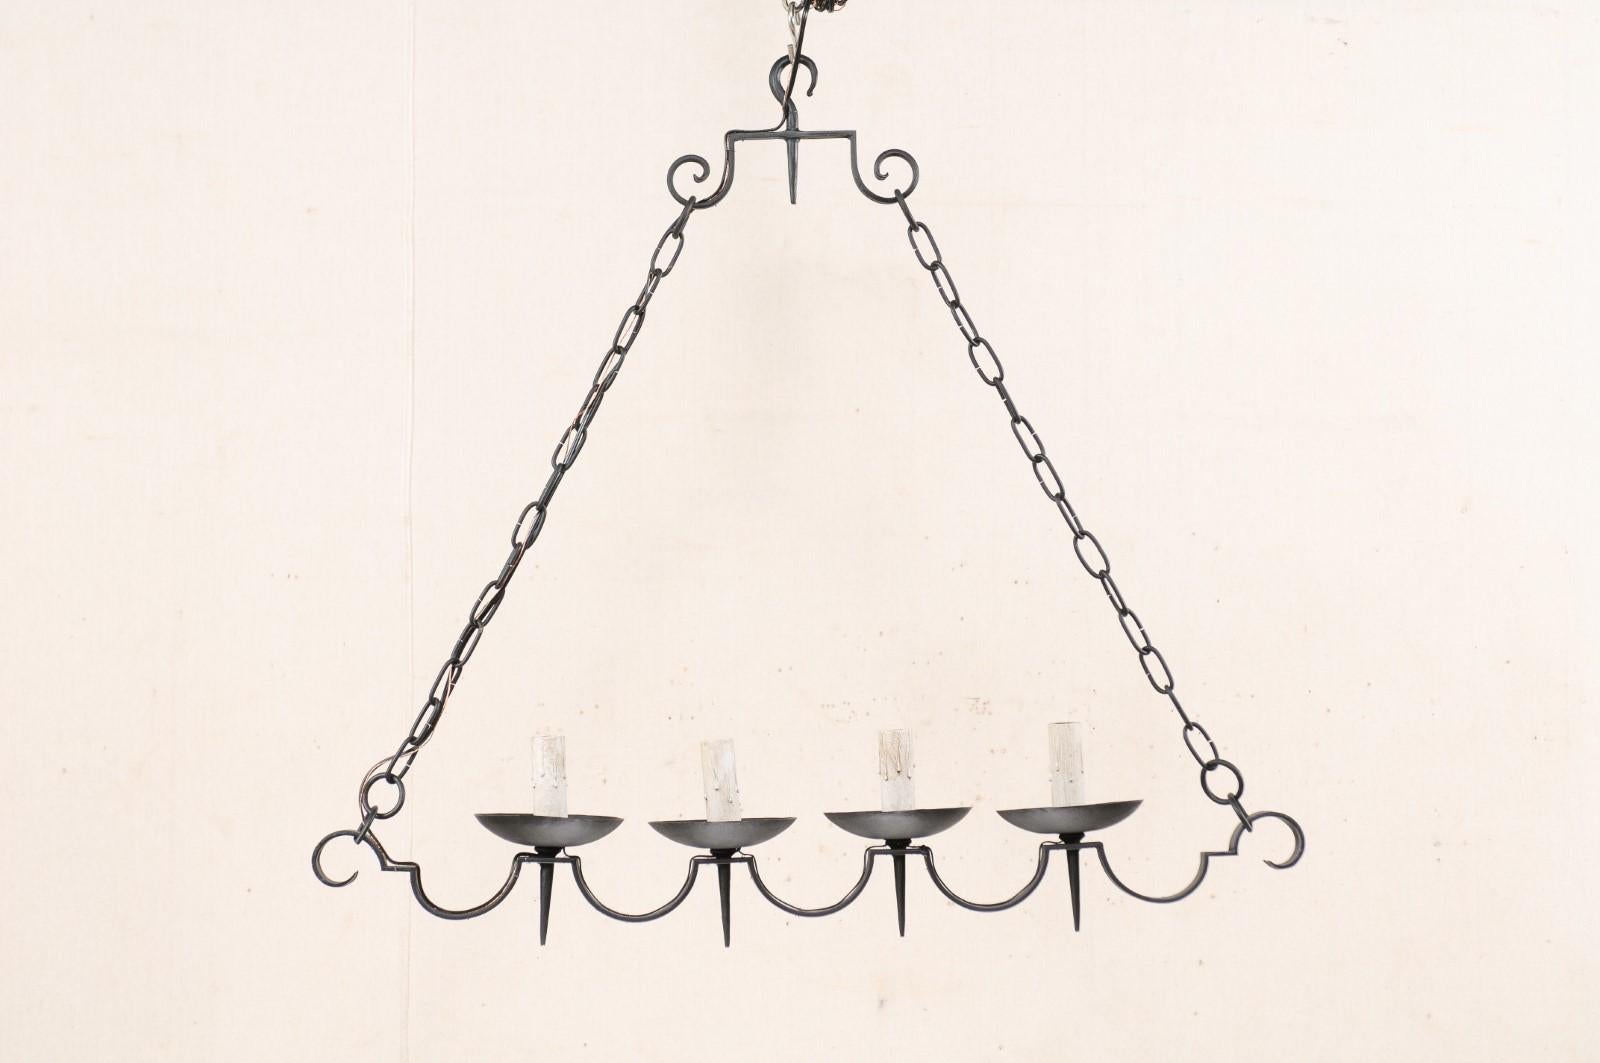 A pair of French black iron four-light chandeliers from the mid-20th century. These vintage chandeliers from France each feature a horizontally positioned scalloped black iron bar, with downward curled ends, with four torch style arms mounted